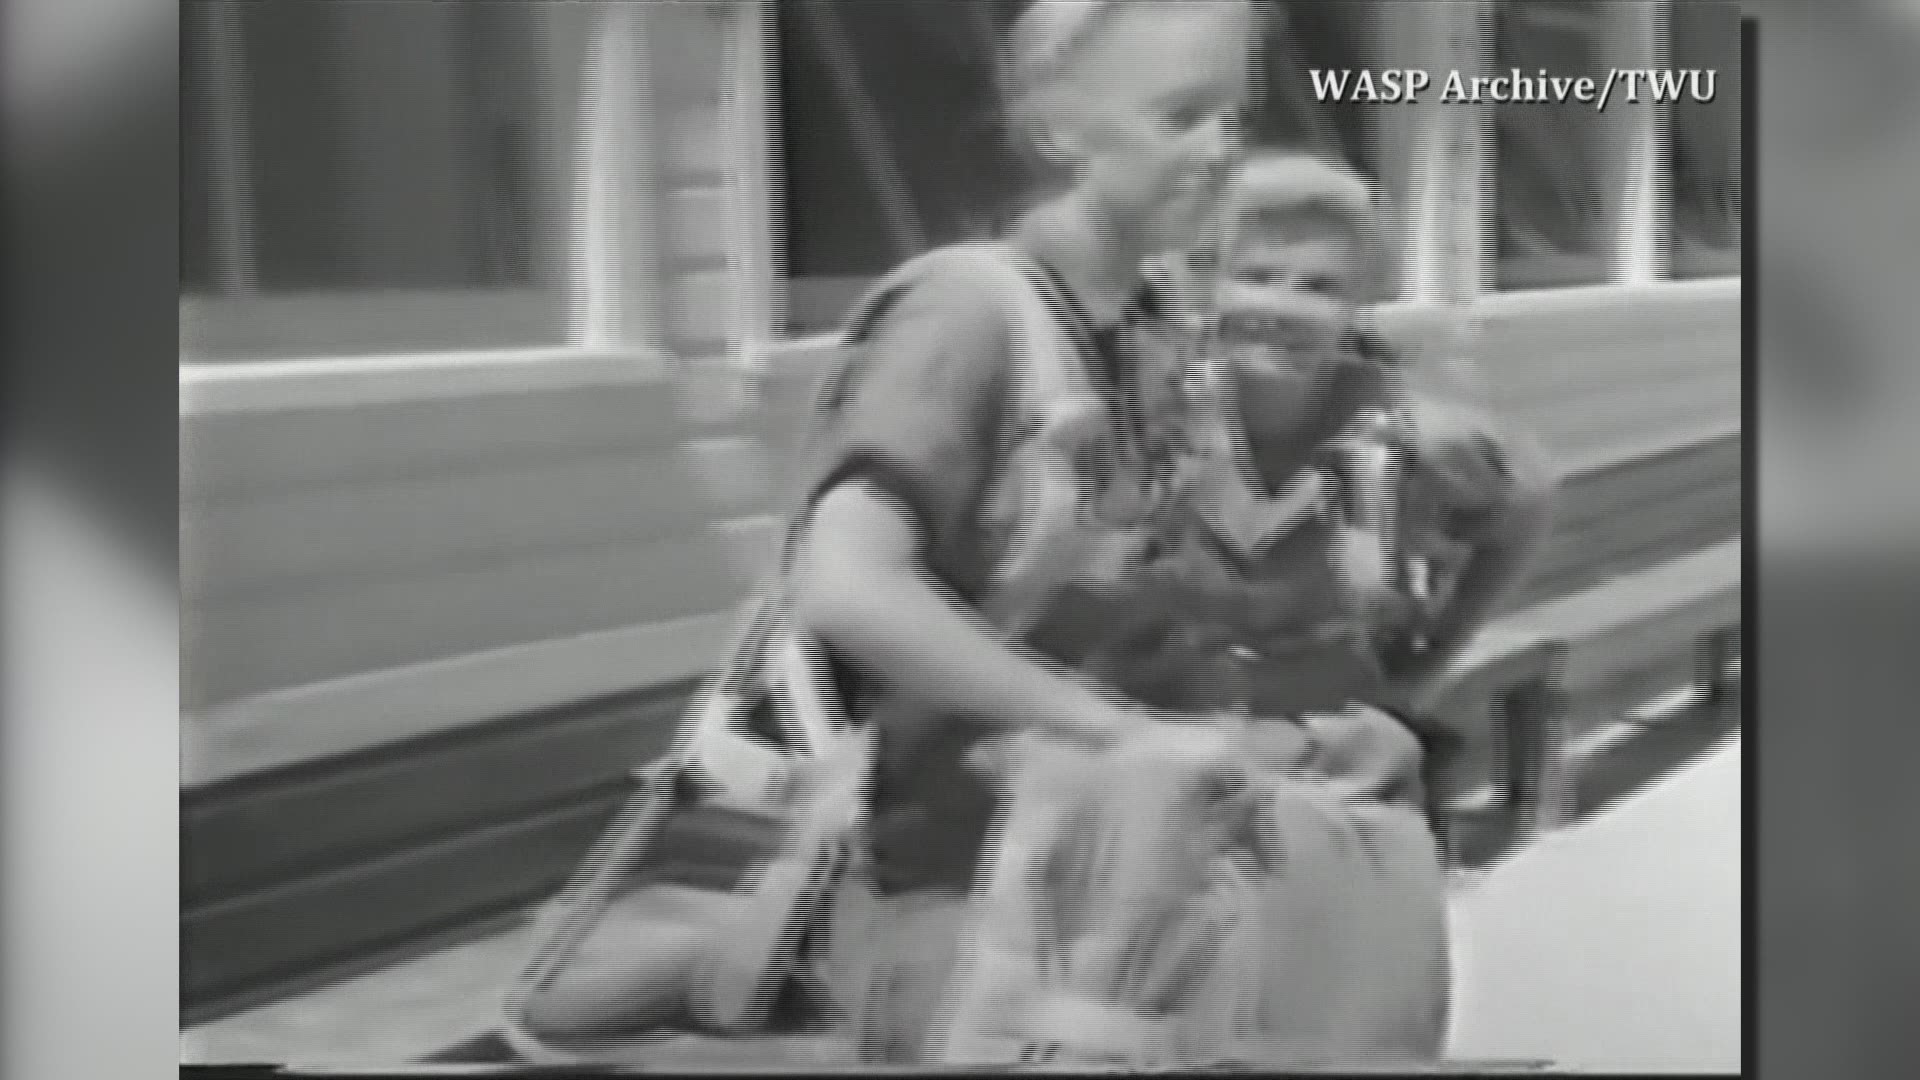 Archival footage of Women's Air-force Service Pilots obtained by NBC News from WASP.